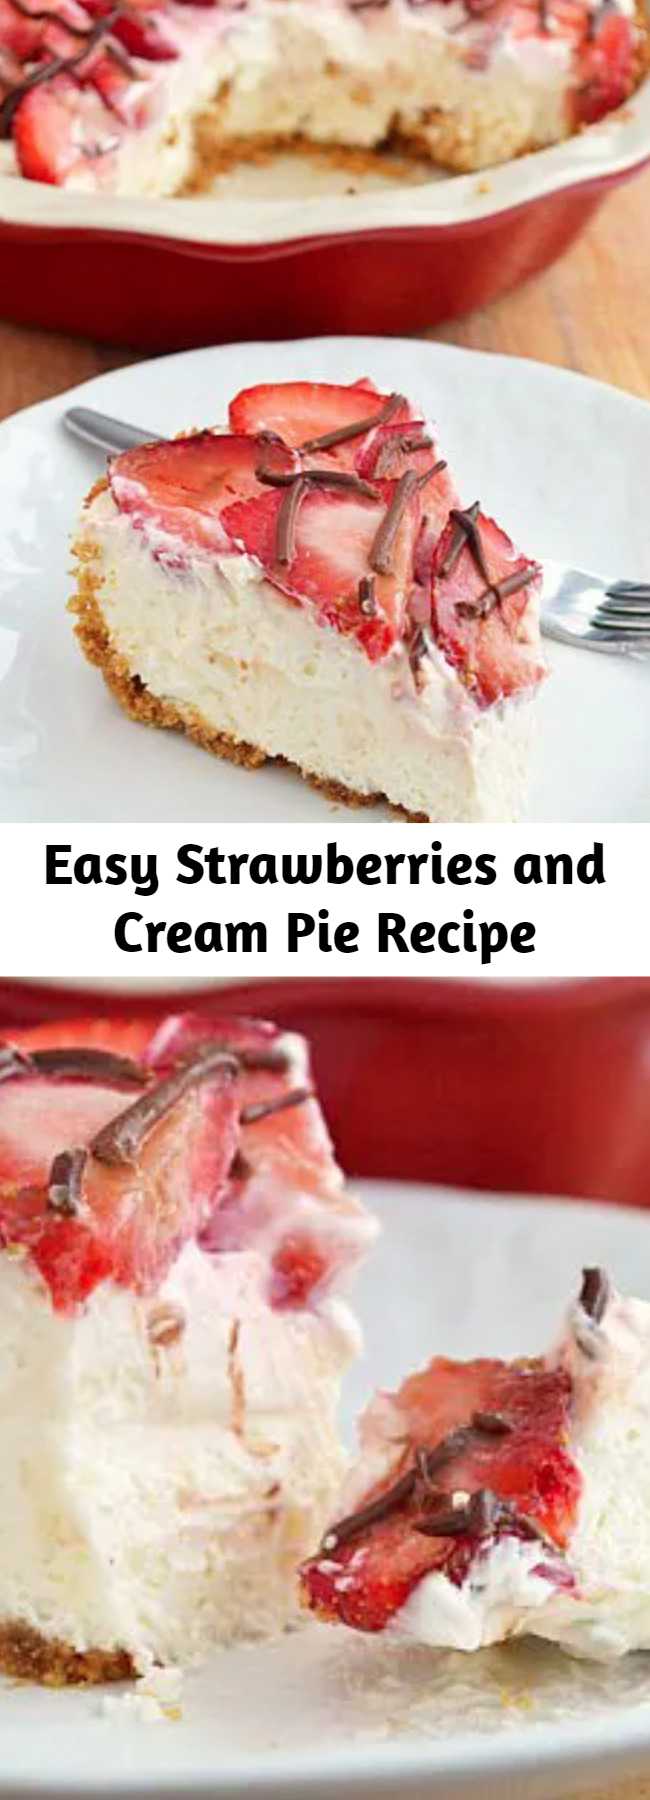 Easy Strawberries and Cream Pie Recipe - A pie that’s so rich, so decadent, yet somehow so light that every bite just melts in your mouth. Mmmmmm.